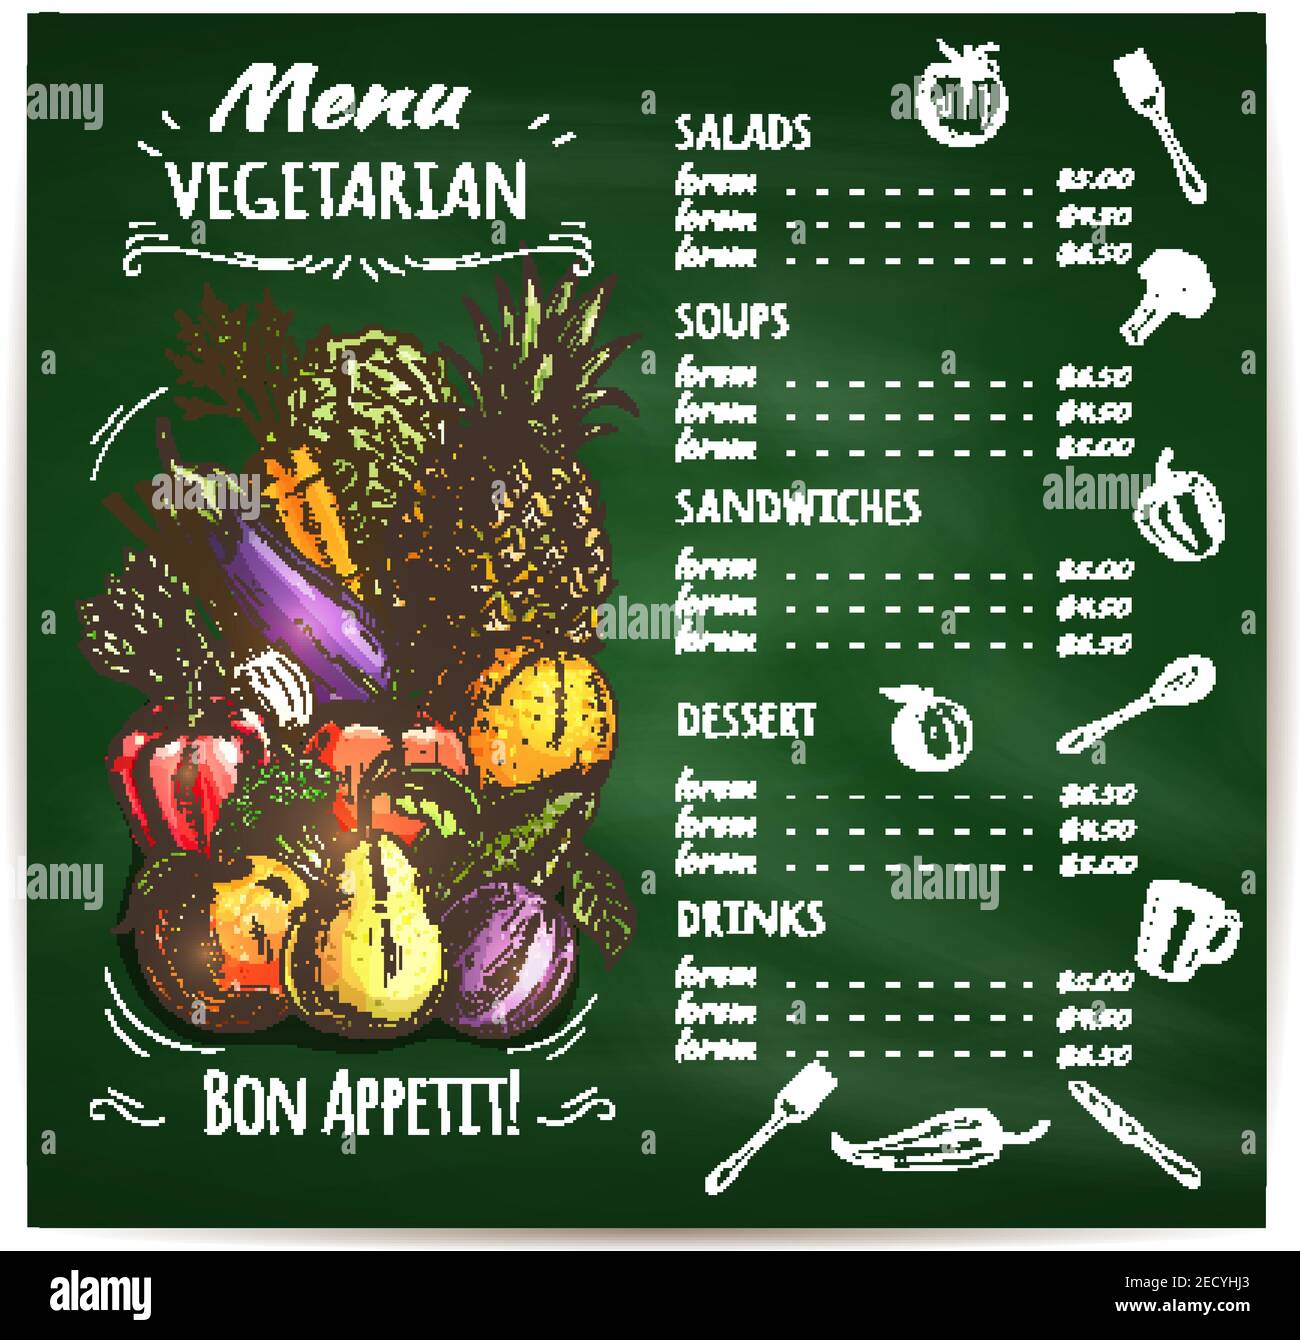 Vegetarian food restaurant menu design template with sketched vegetables, fruits and chalked layout of dishes list with prices on green blackboard Stock Vector